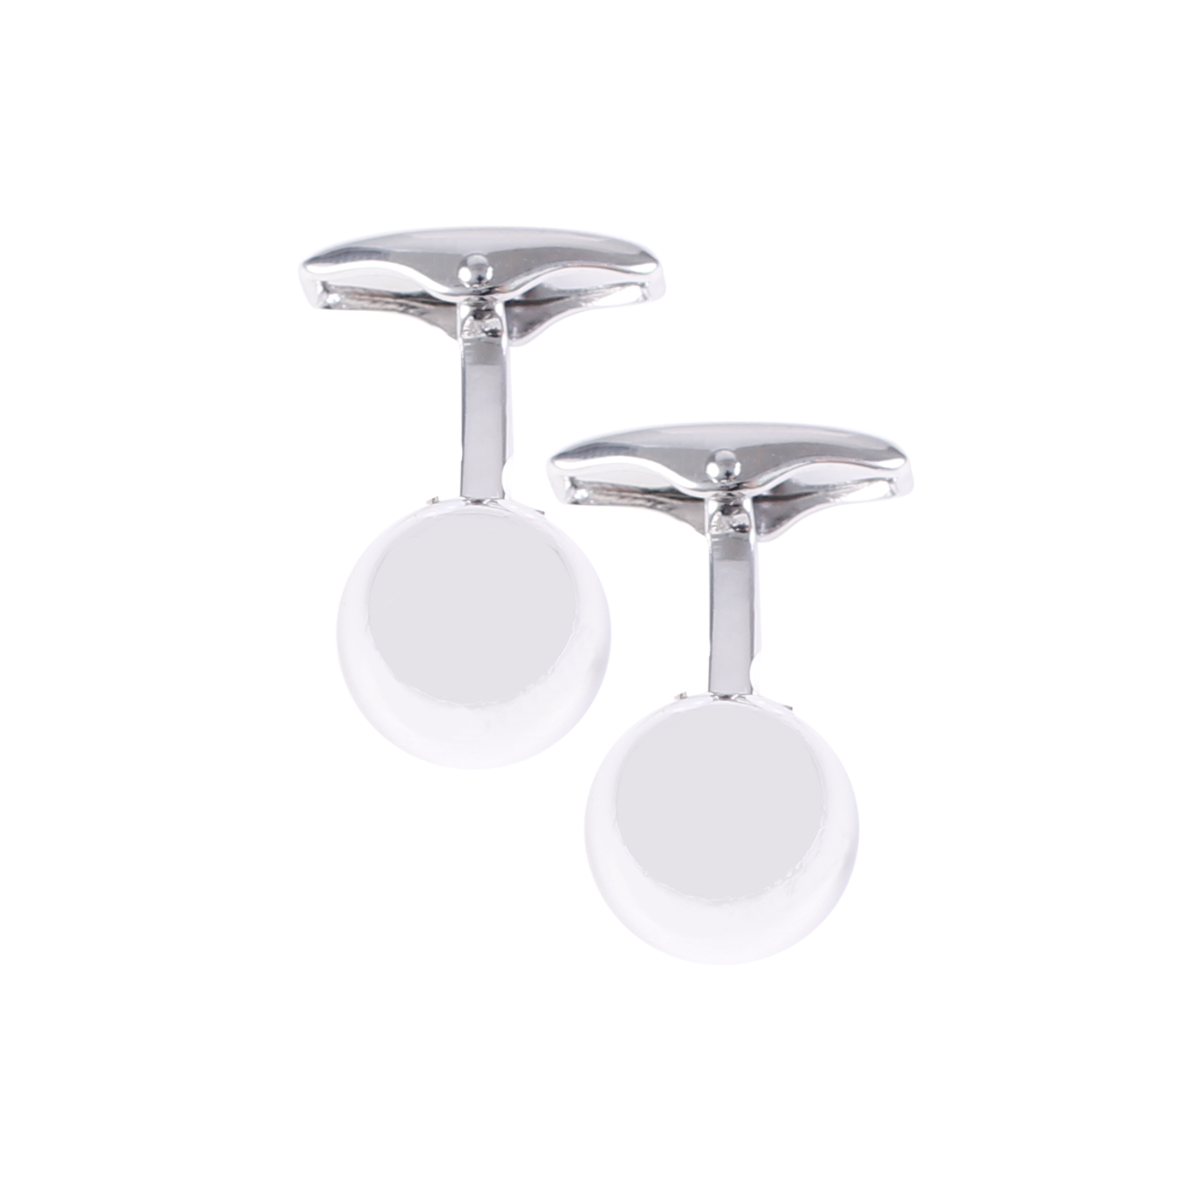 Globe-Shaped Silver-Plated Solid Brass Cufflinks by House of Amanda Christensen